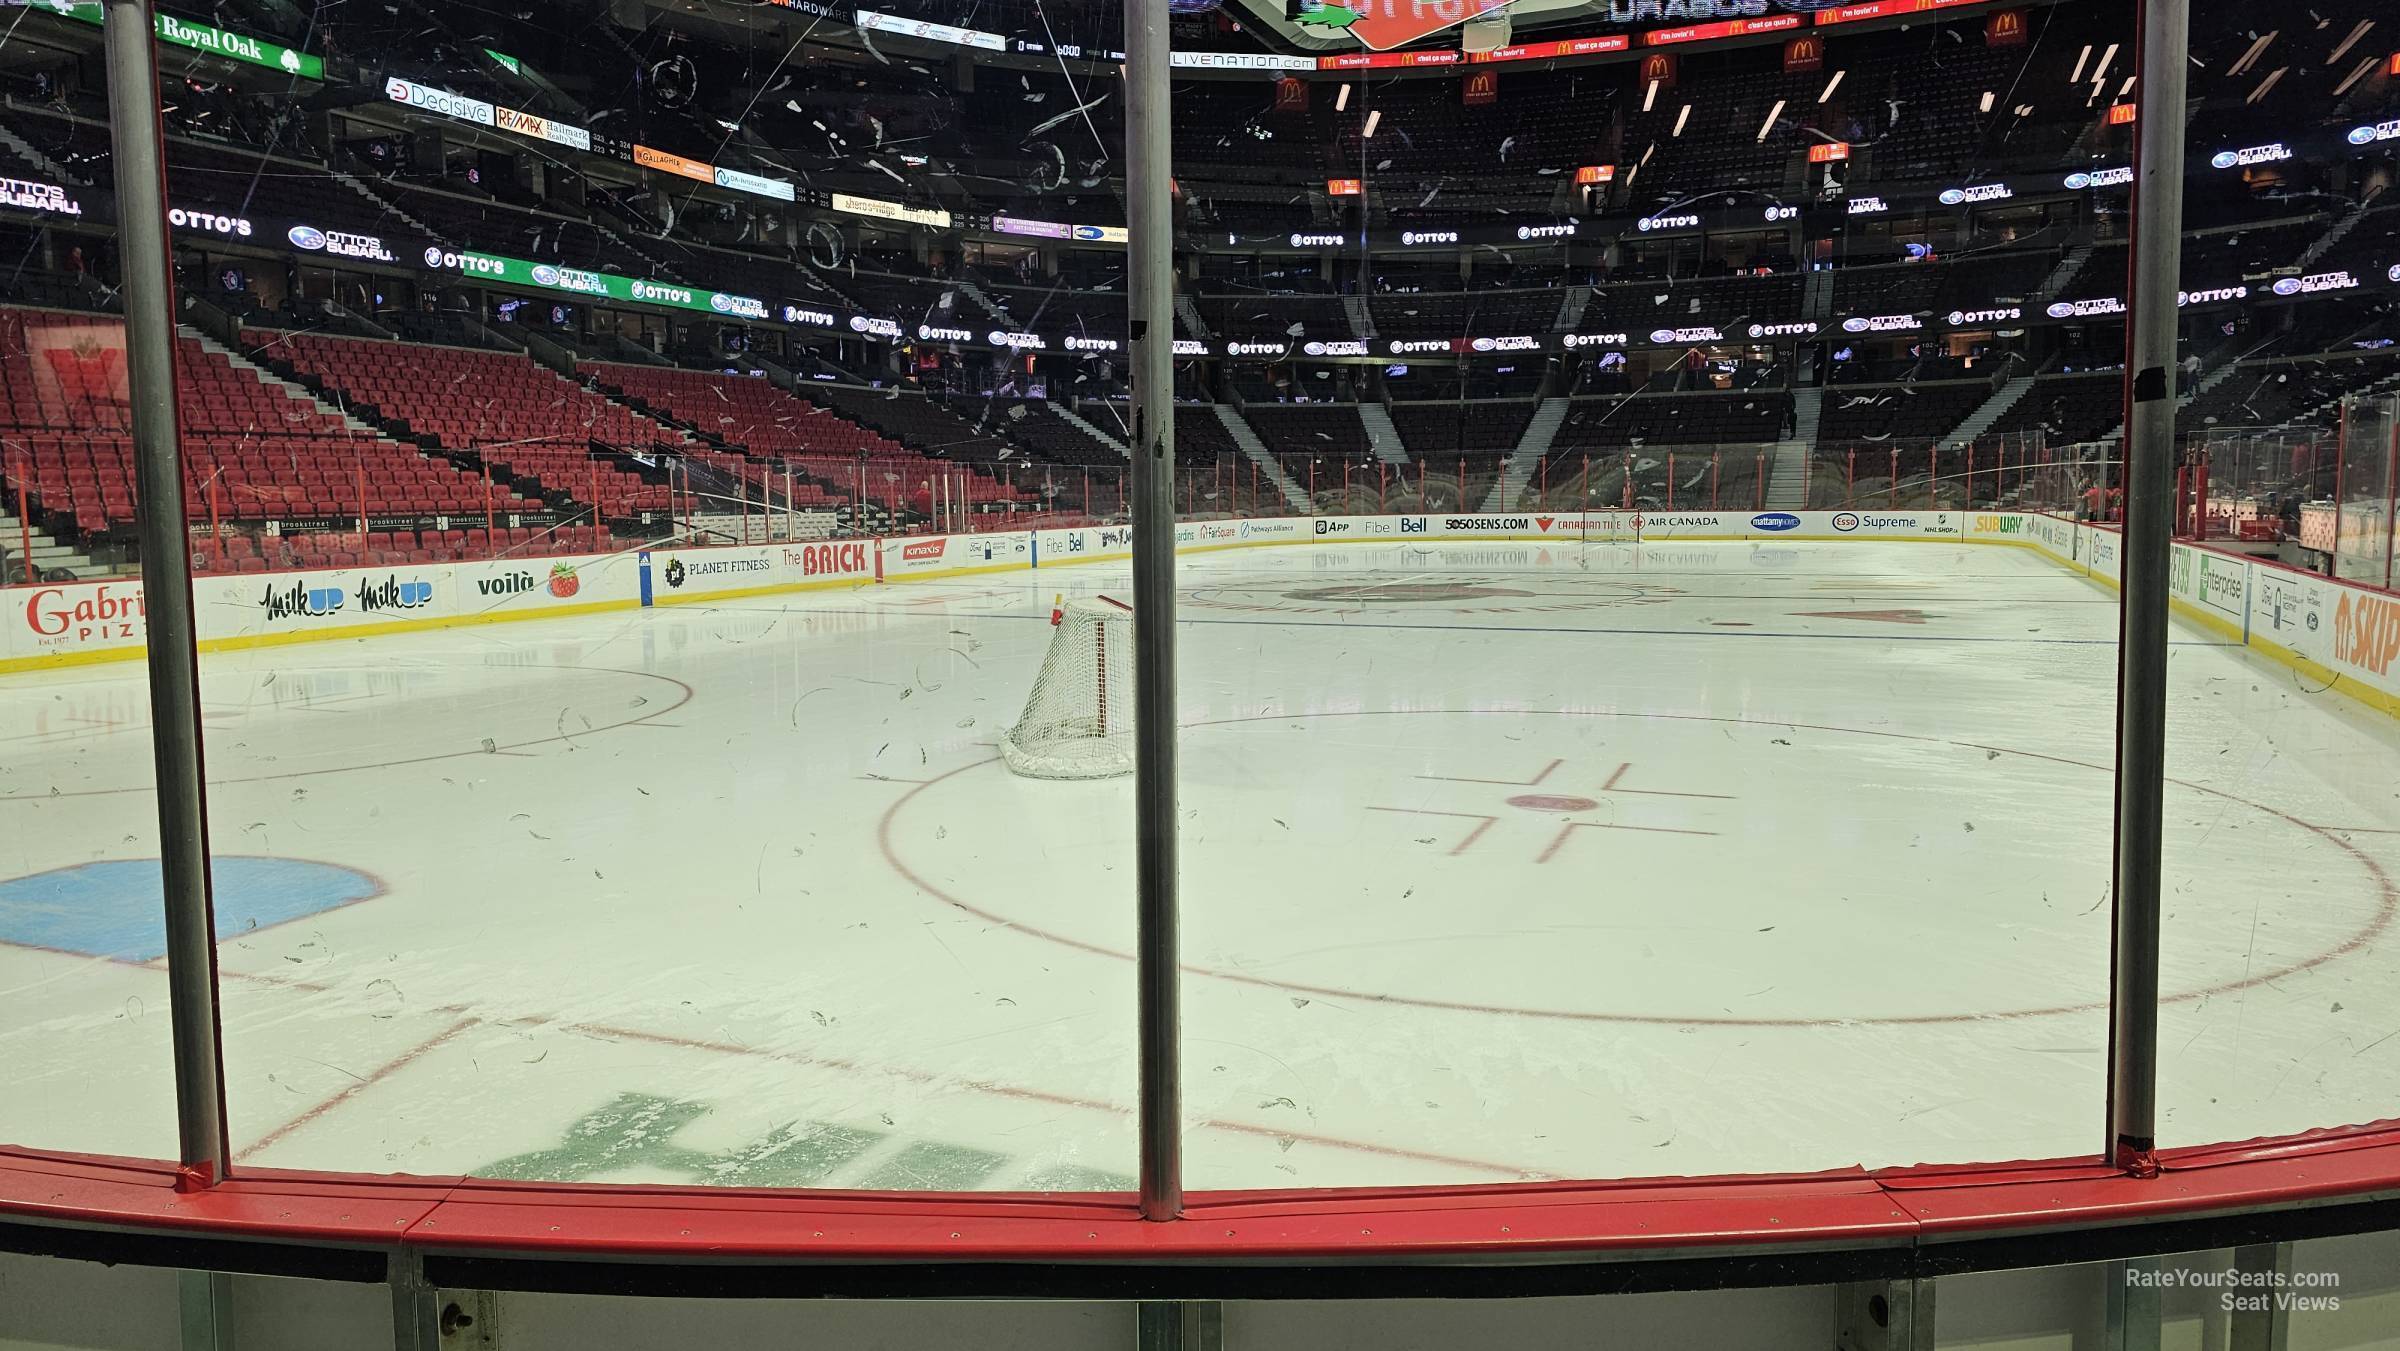 section 110, row c seat view  for hockey - canadian tire centre